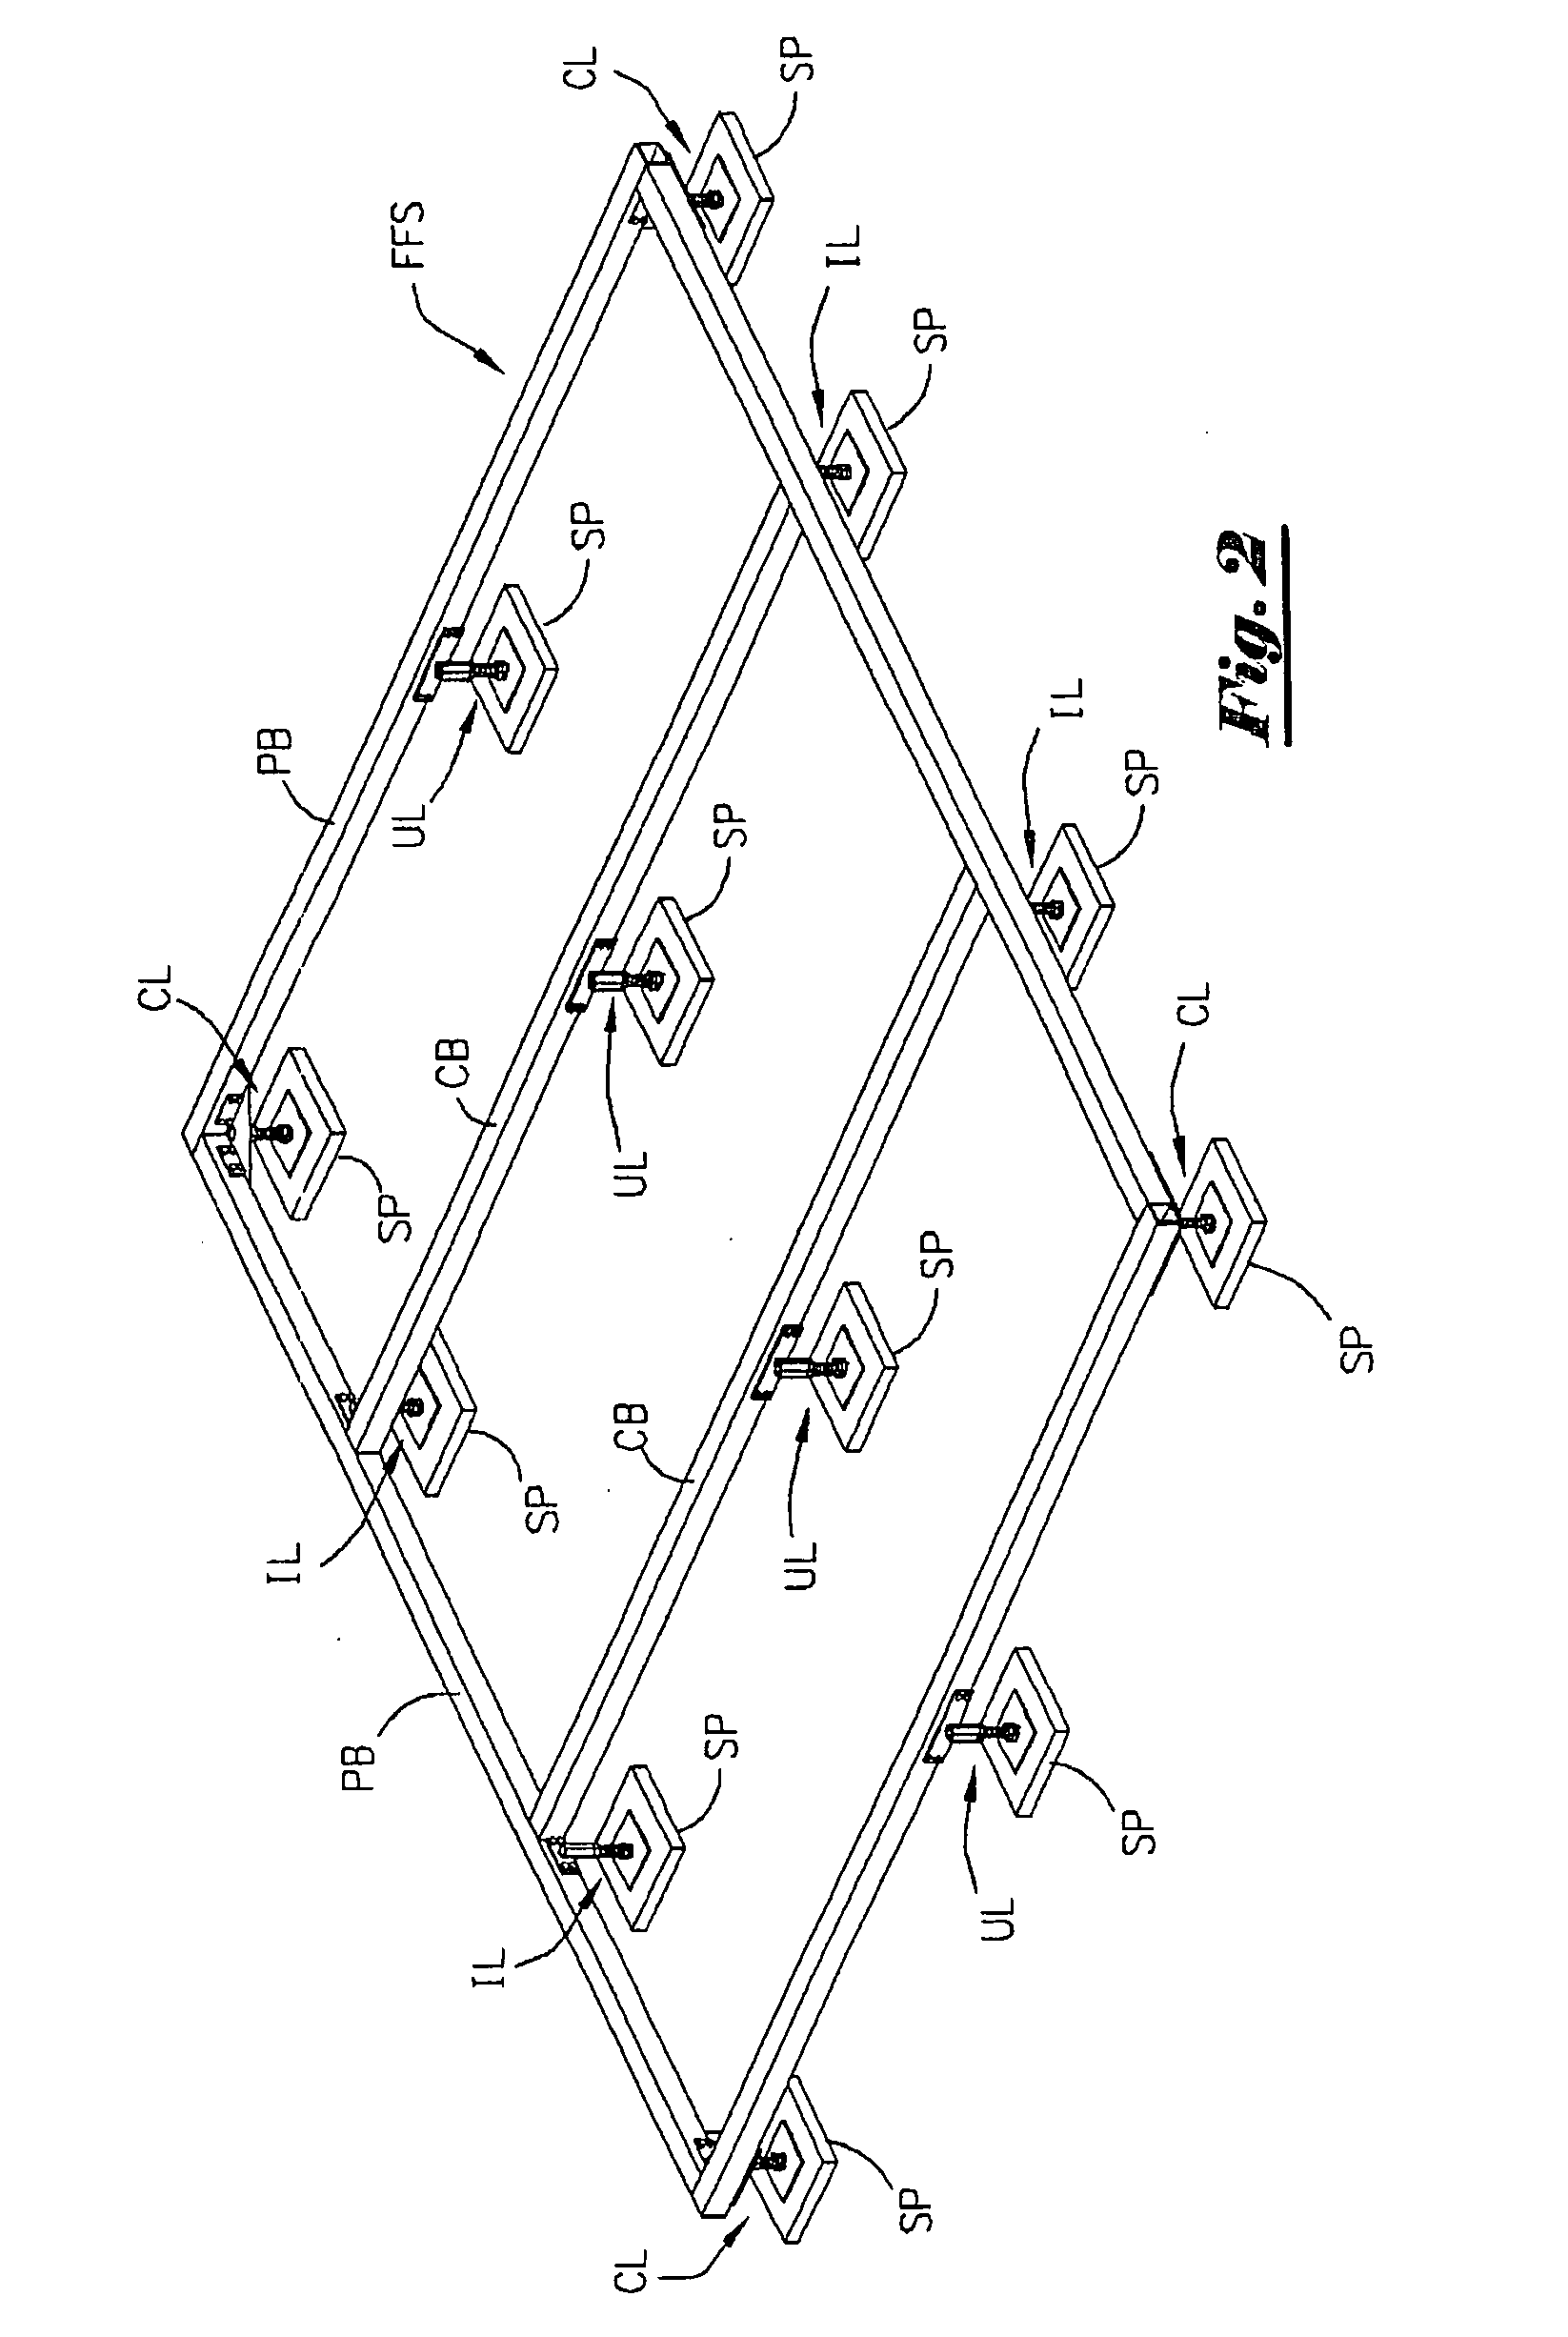 Prefabricated rapid response accommodation structure